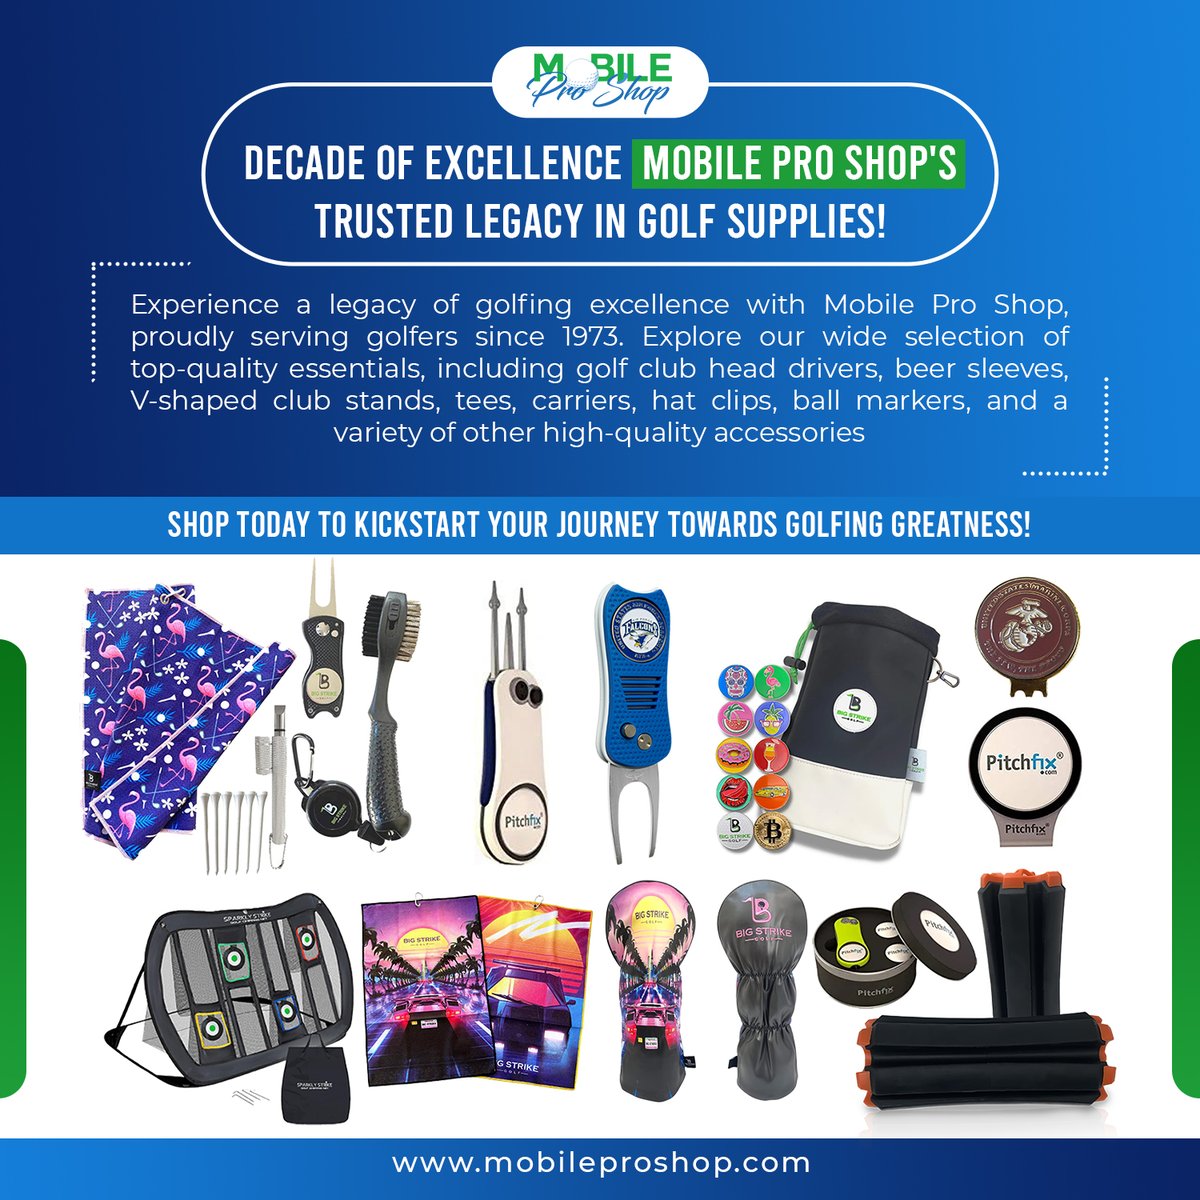 Decade of Excellence Mobile Pro Shop's Trusted Legacy in Golf Supplies!
#MobileProShop #GolfingEssentials #OutdoorLifestyle #SportingGoods #GolfGear #QualityProducts #GolfingCommunity #ShopNow #GolfEquipment #EnhanceYourGame #ExploreTheGreen